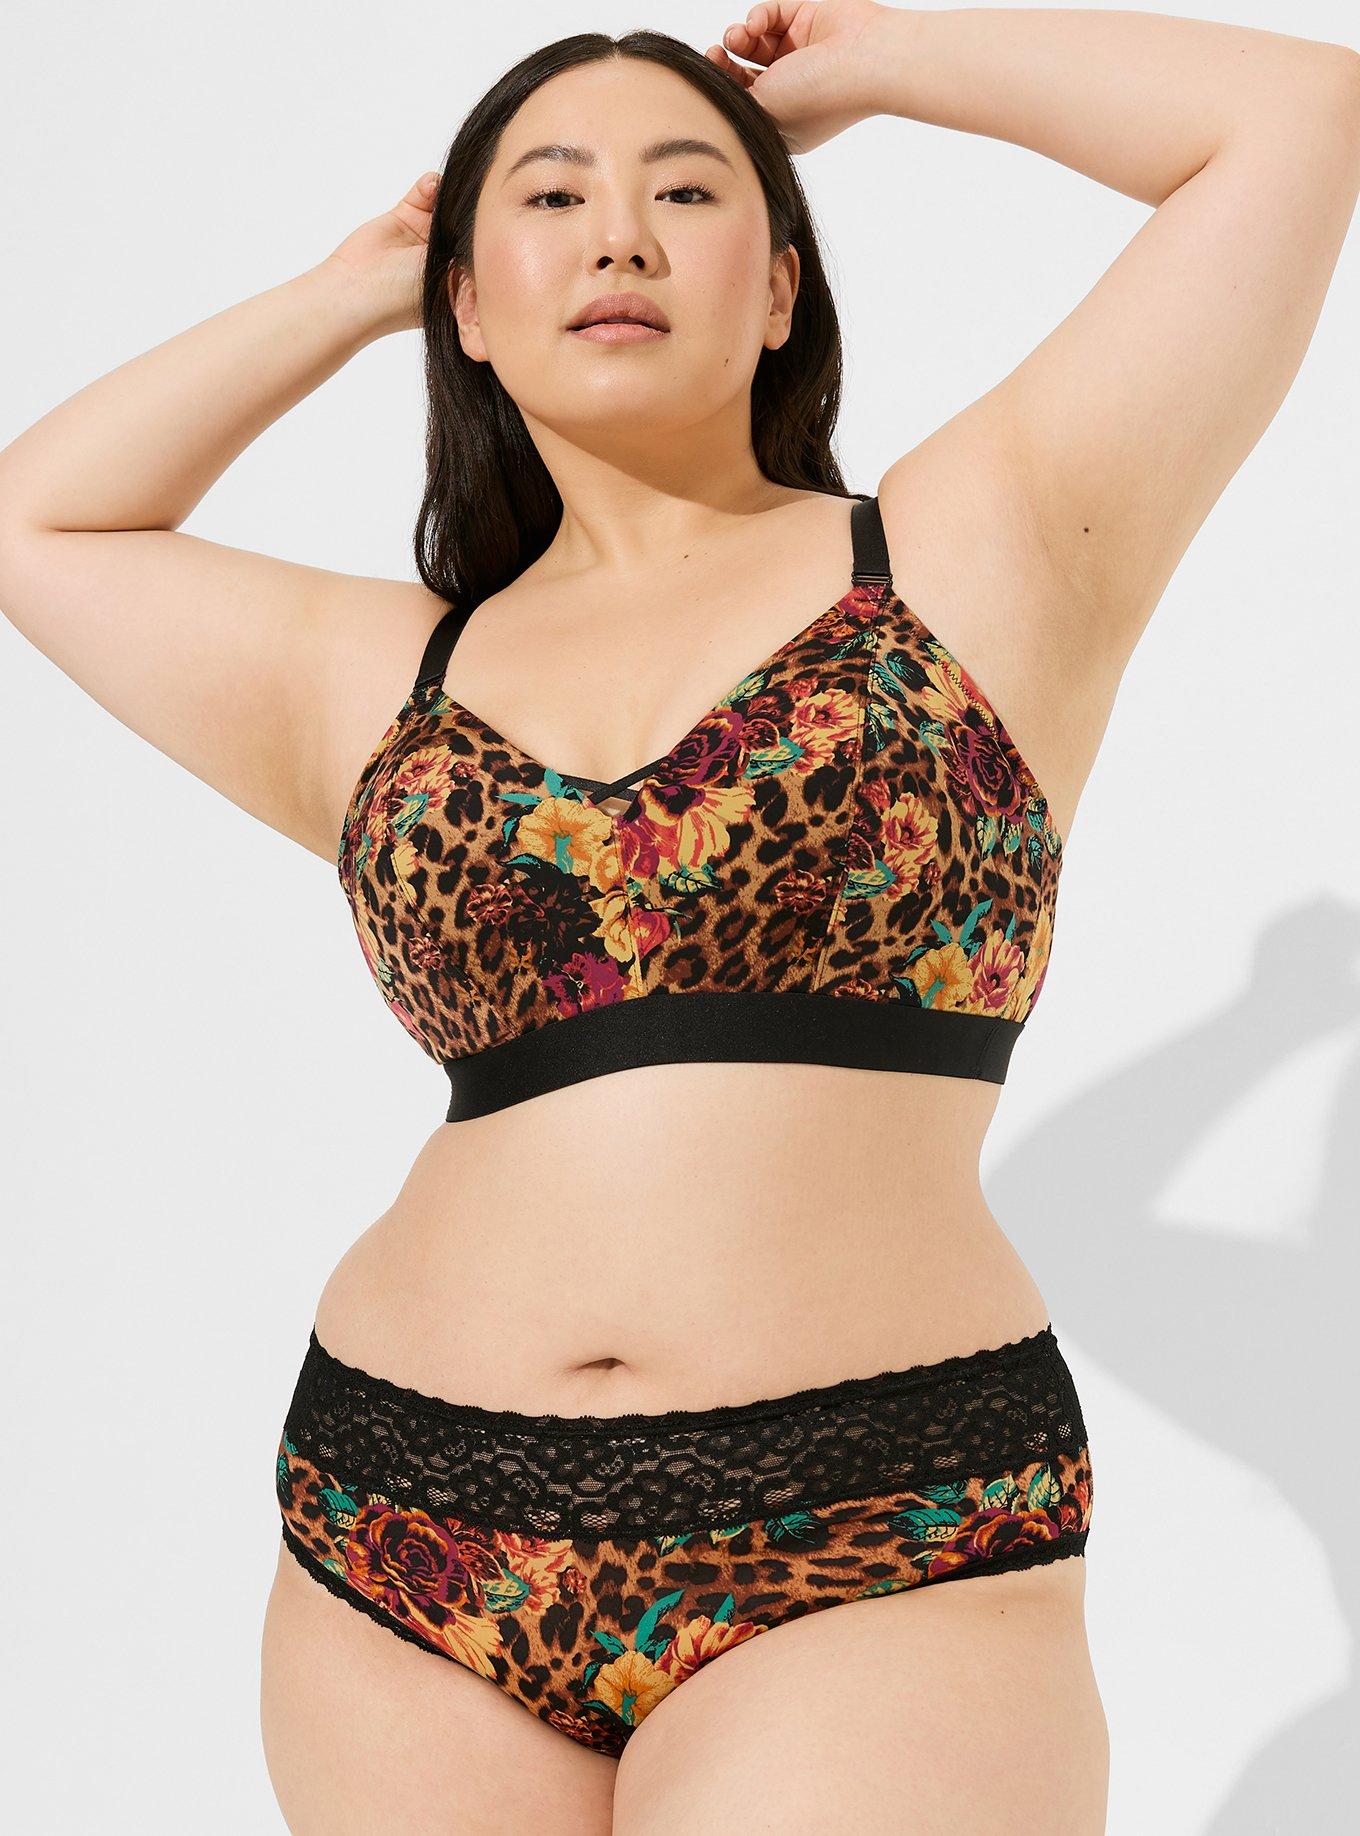 Bralette with support - 21 products